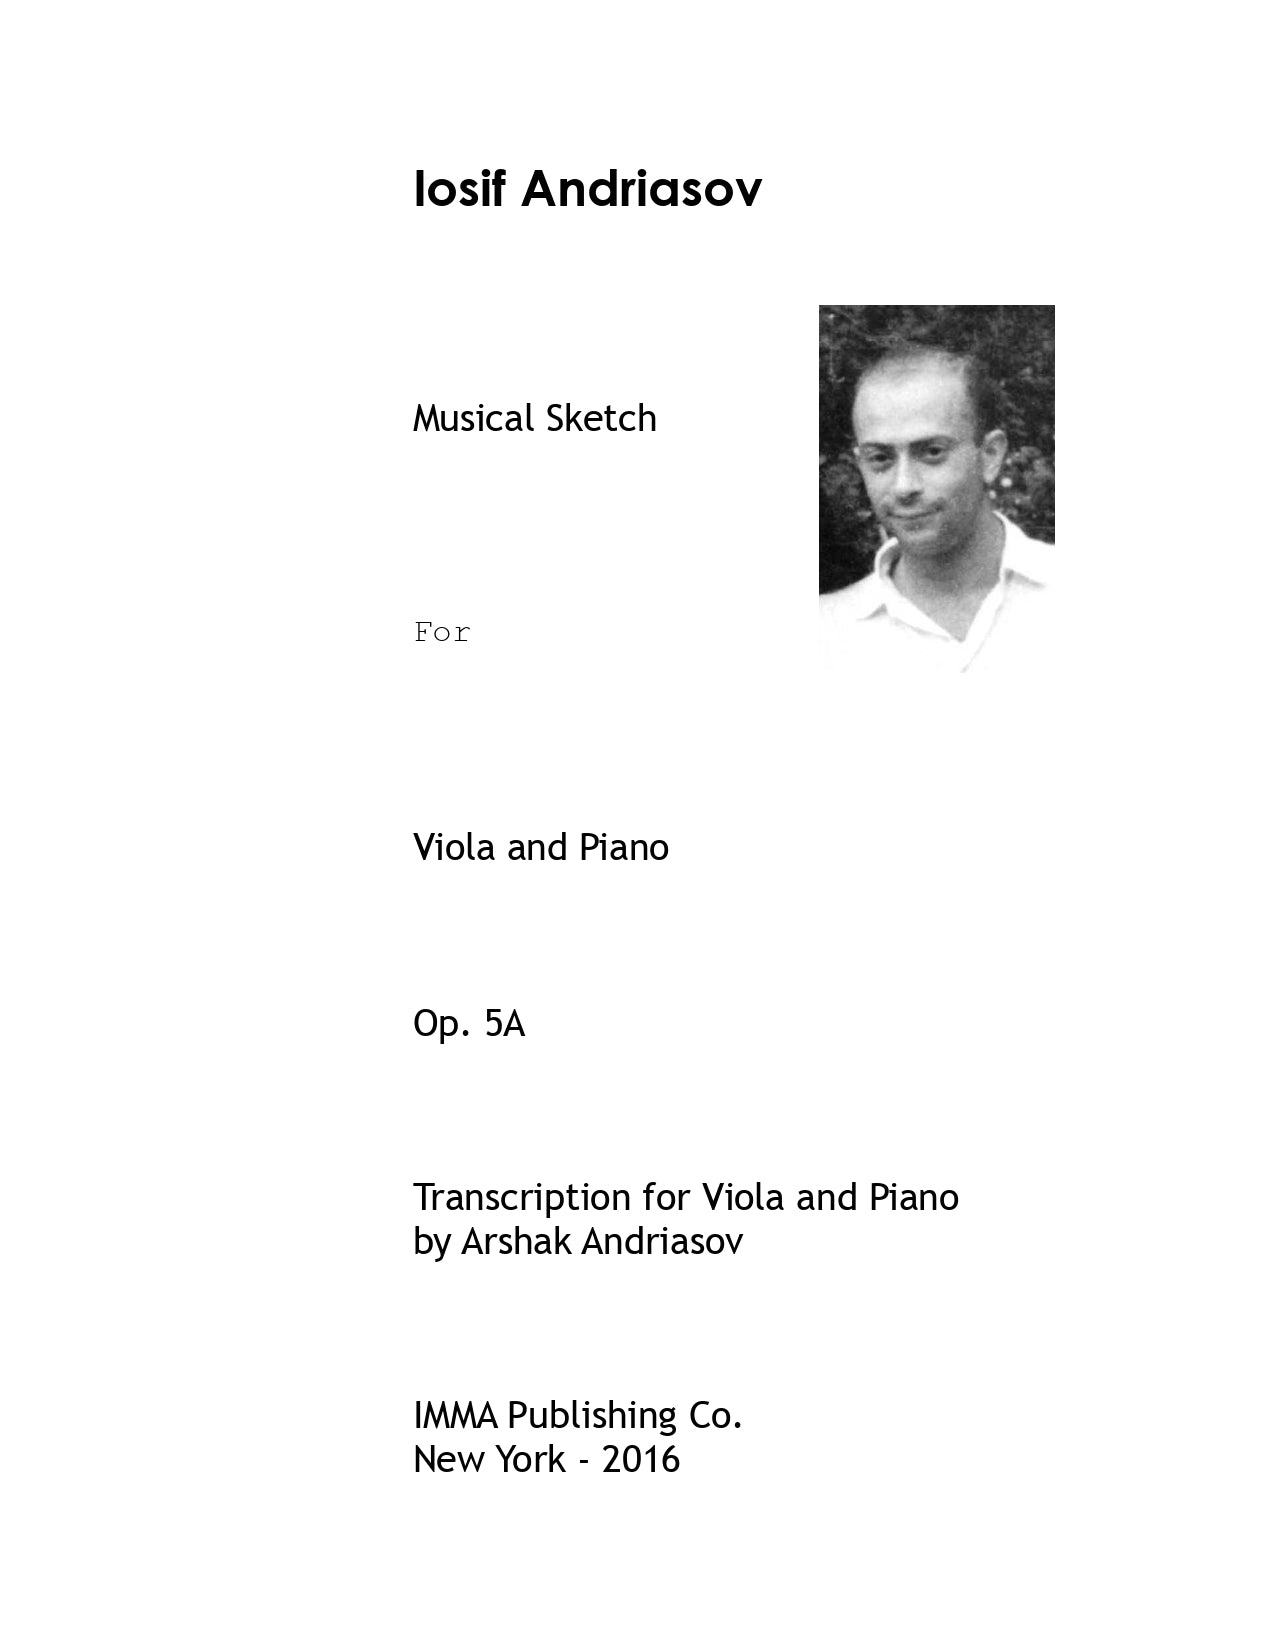 018. Iosif Andriasov: Musical Sketch, Op. 5A for Viola and Piano.